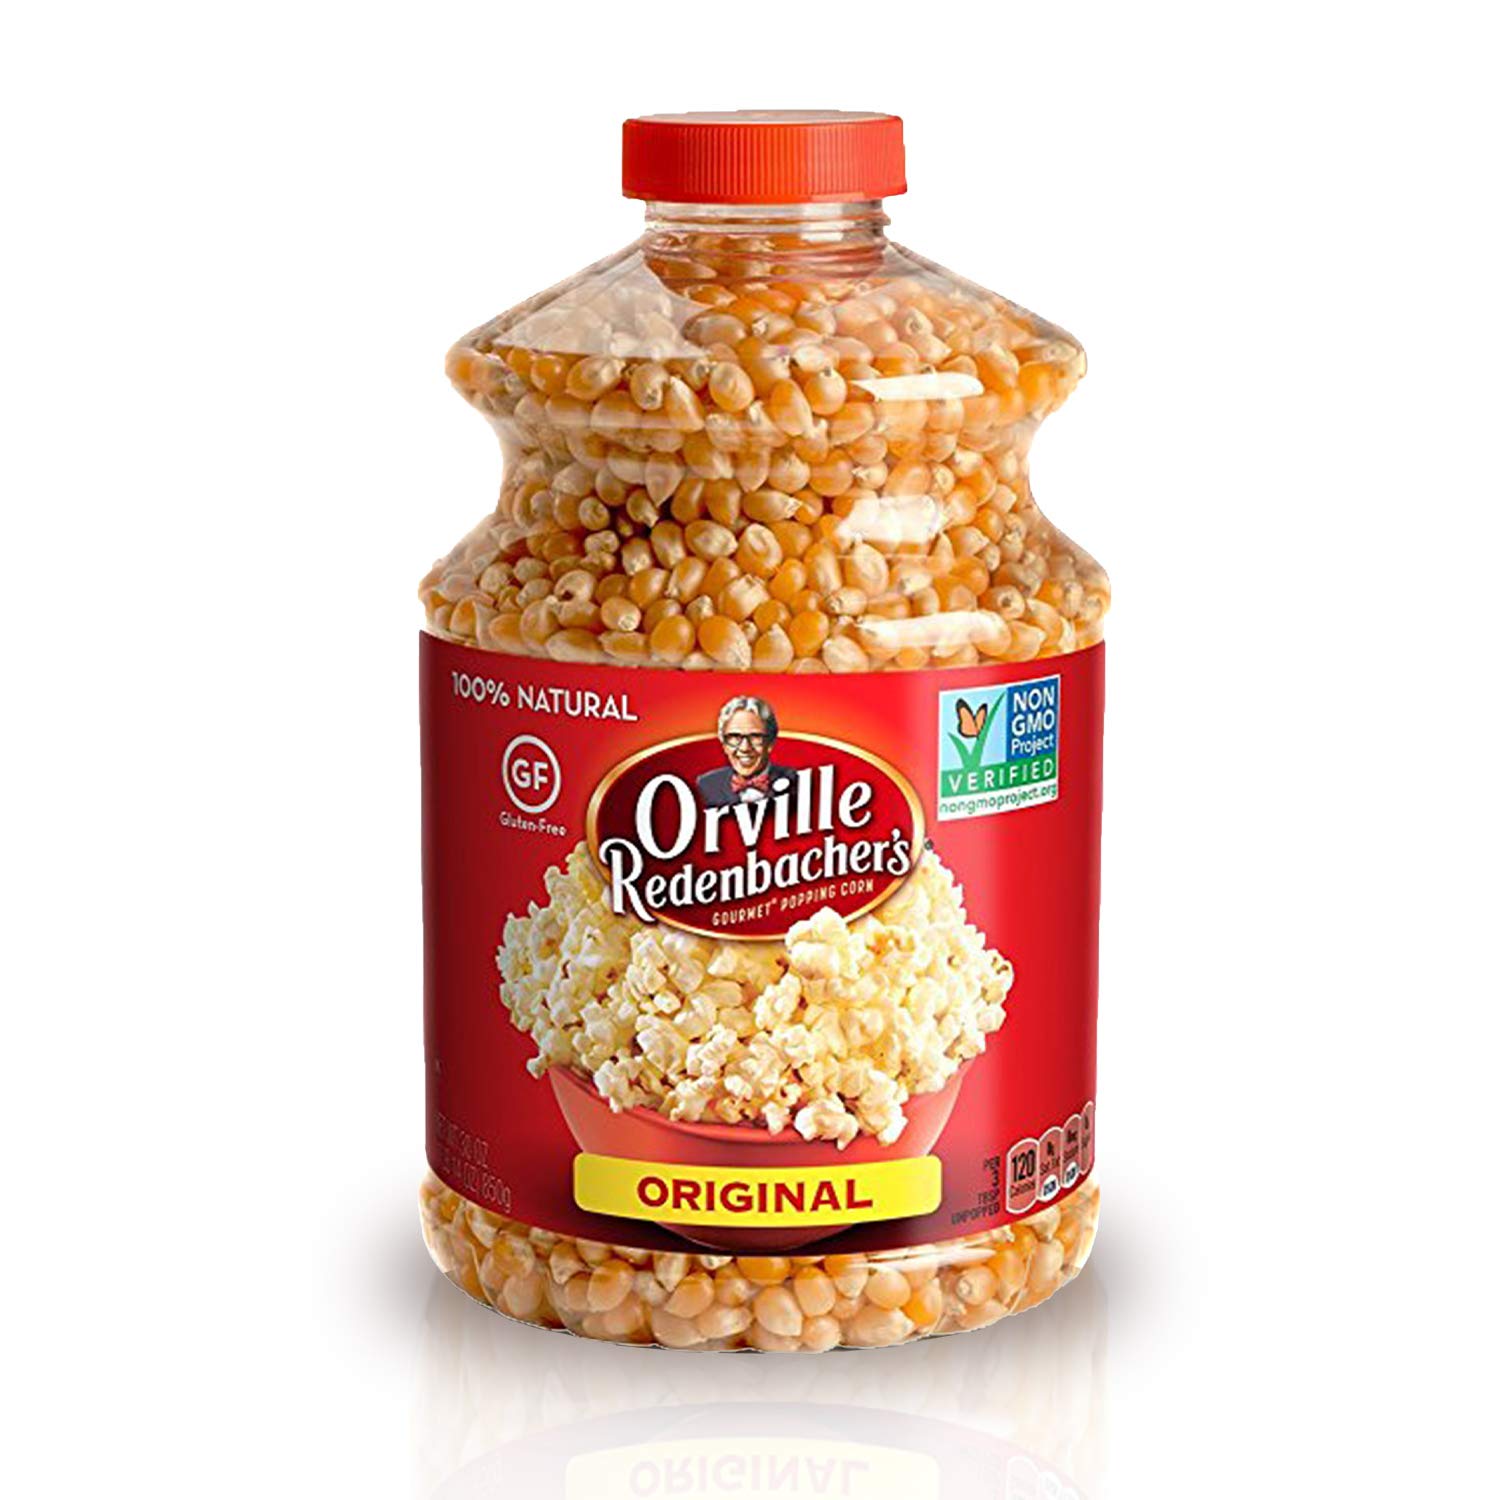 6-Pack 30-Oz Orville Redenbacher's Original Yellow Gourmet Popcorn Kernels (11.25-Lbs) $13.60 + Free Shipping w/ Prime or $25+